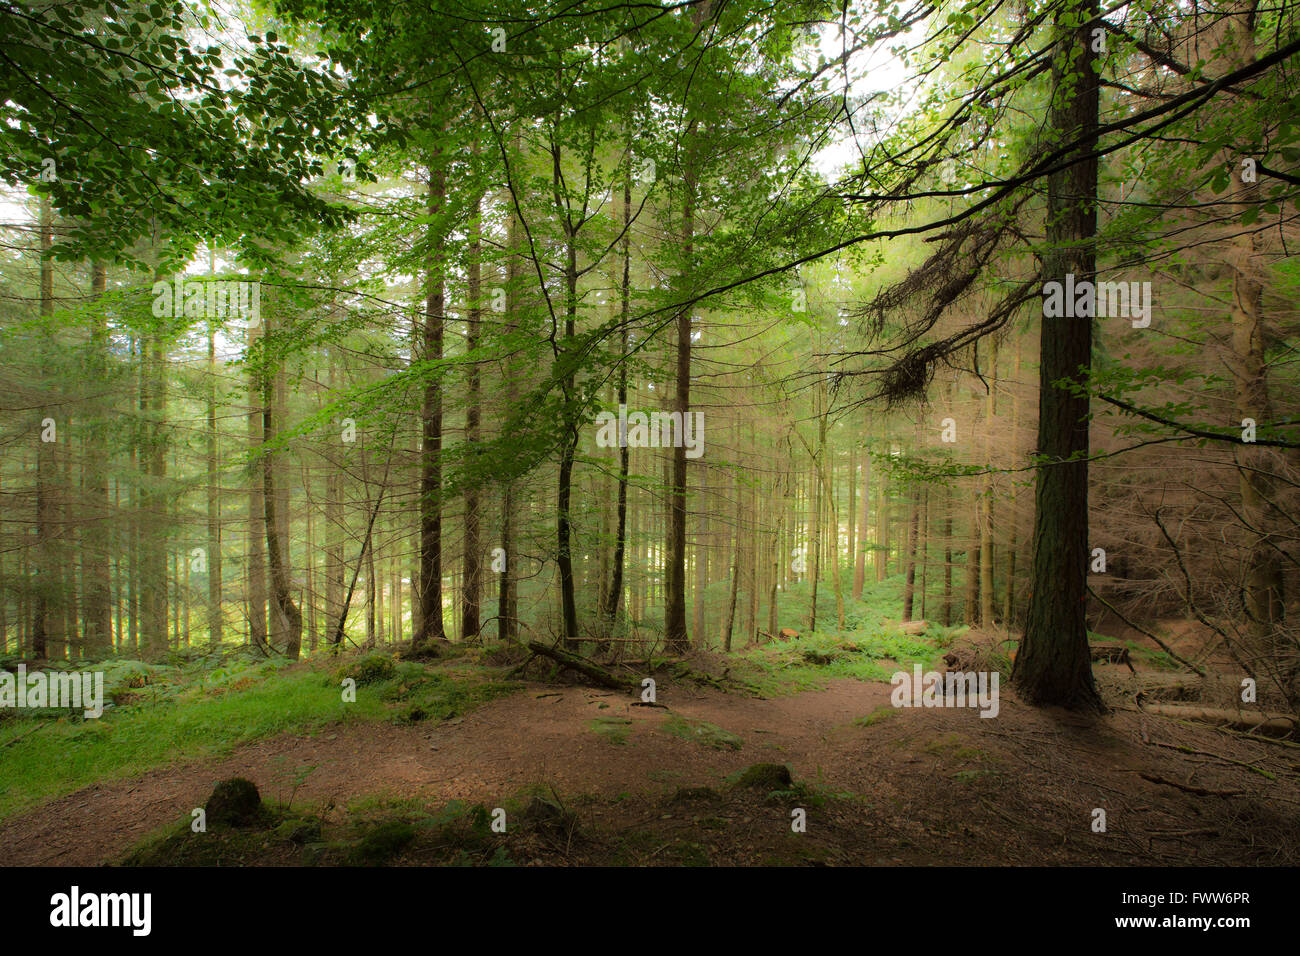 Scottish forest scene with sunlight coming through trees Stock Photo